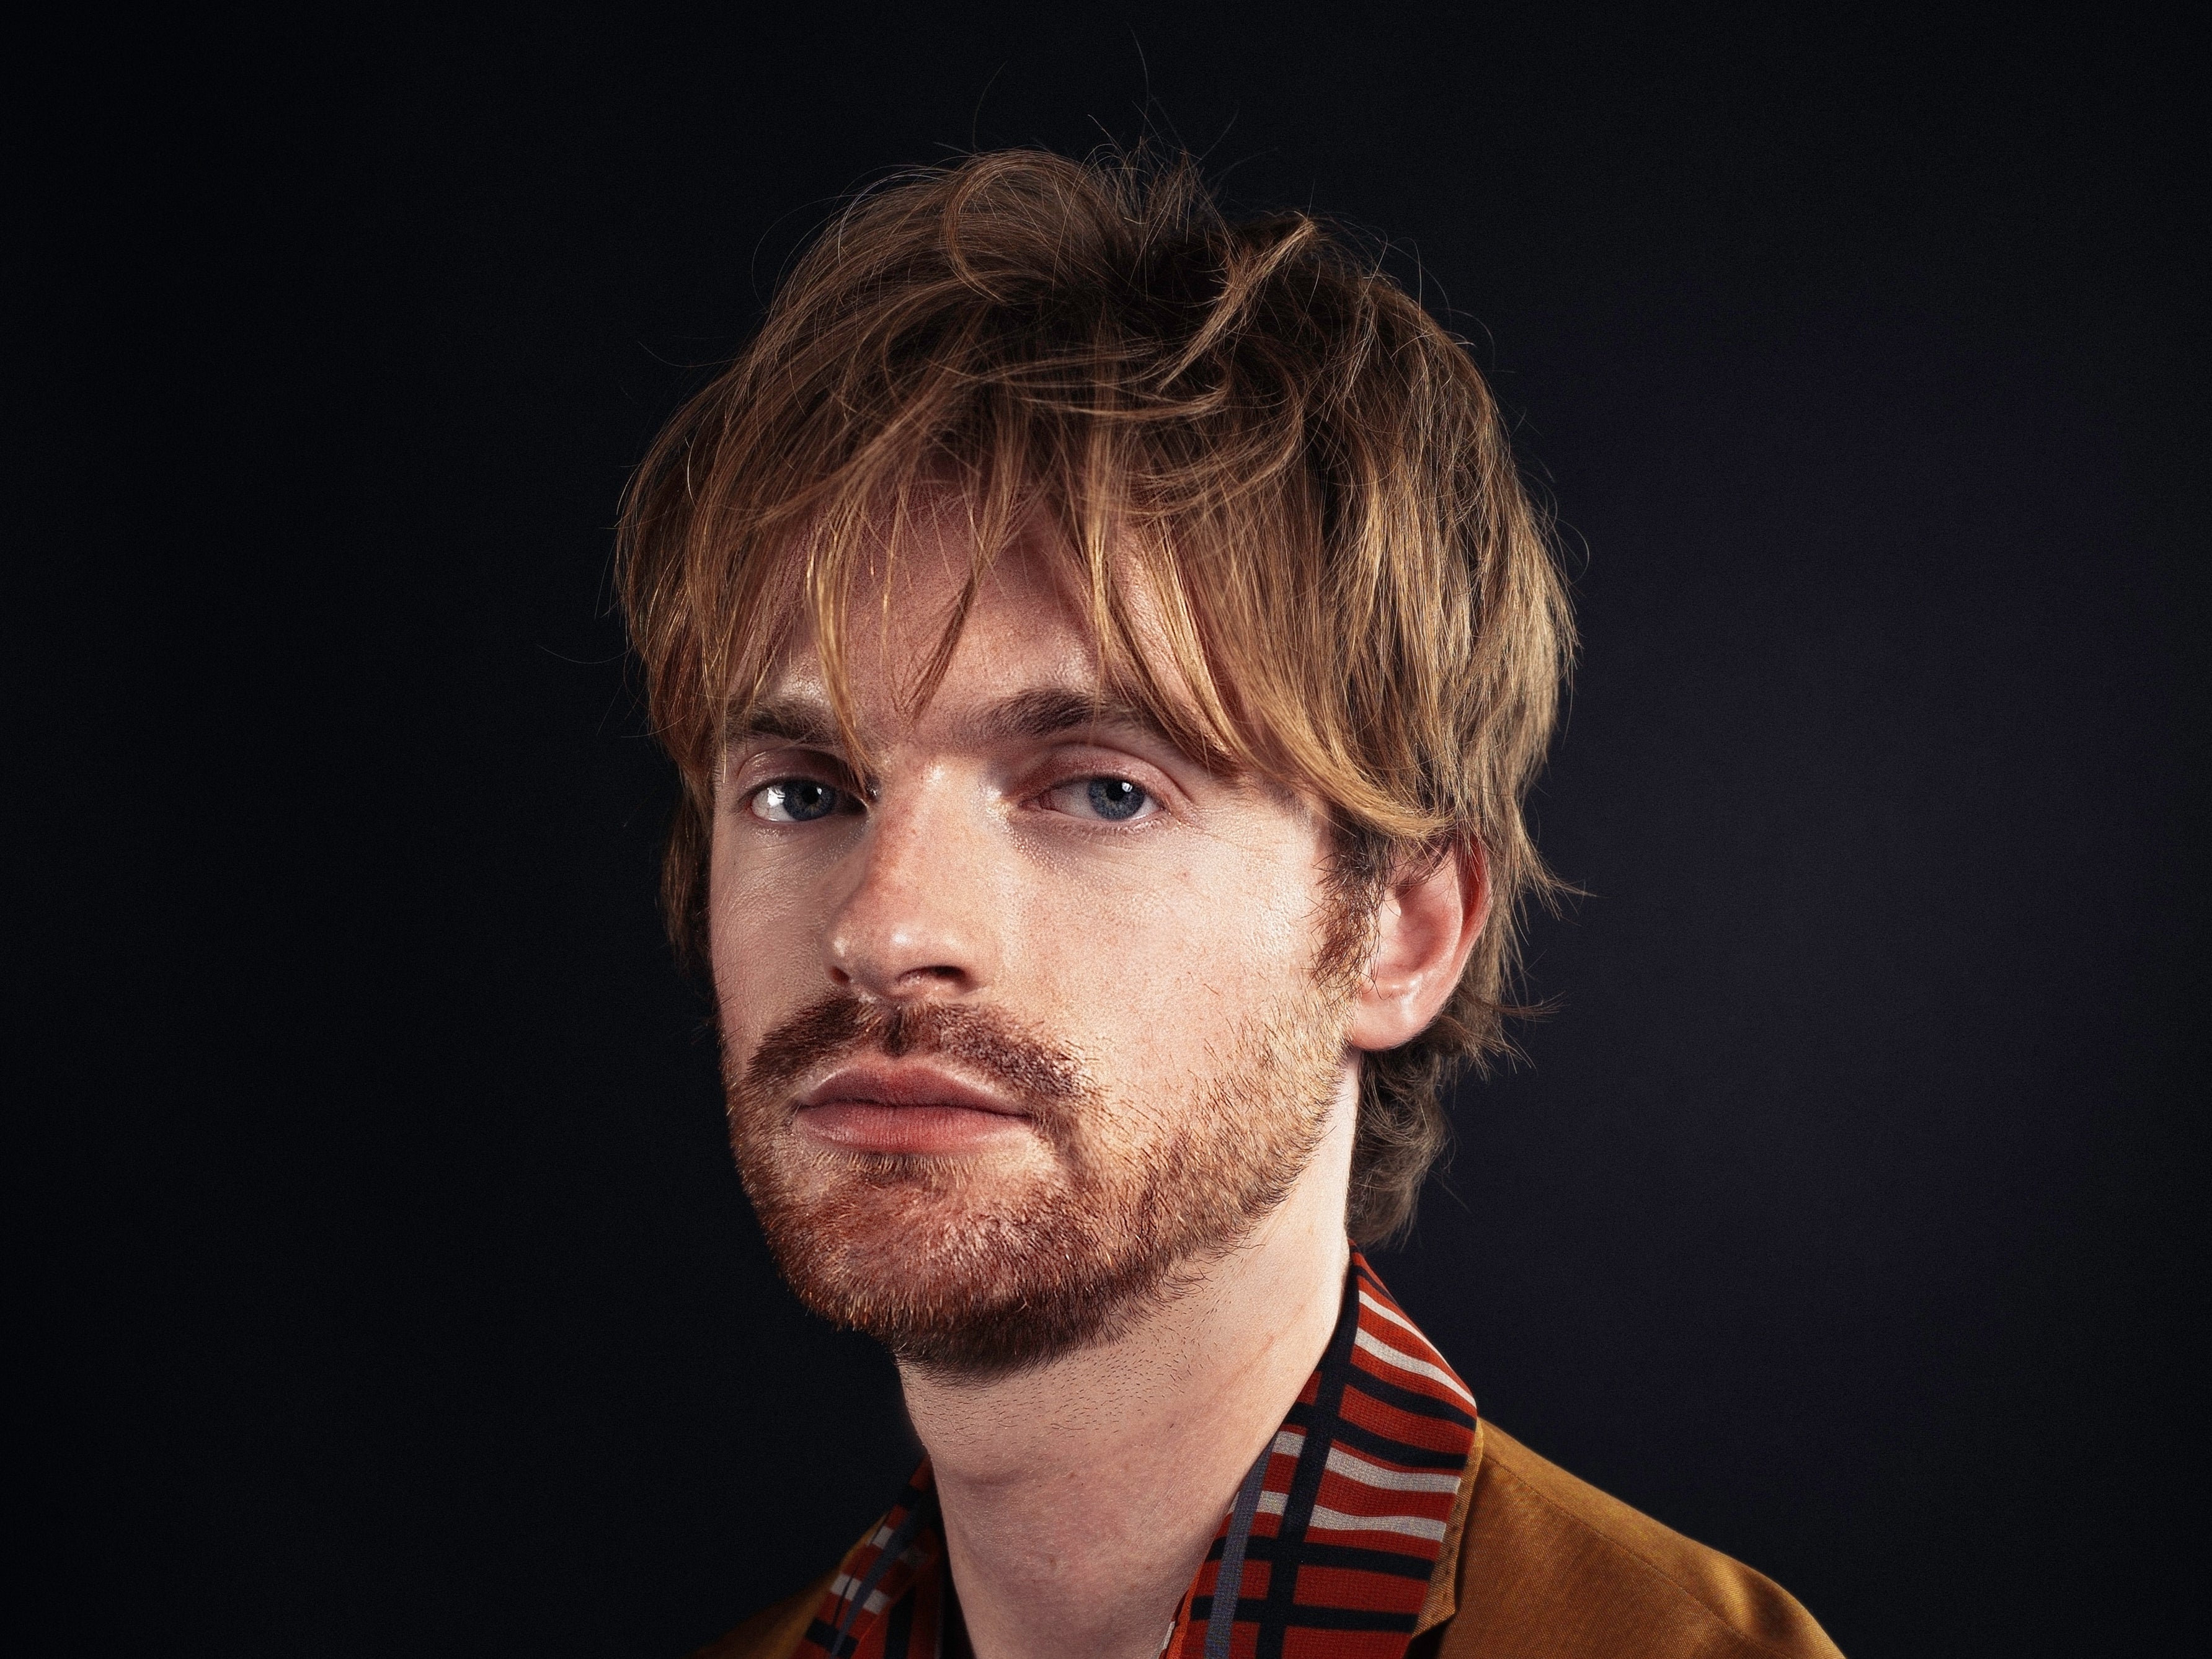 Producer and musician Finneas